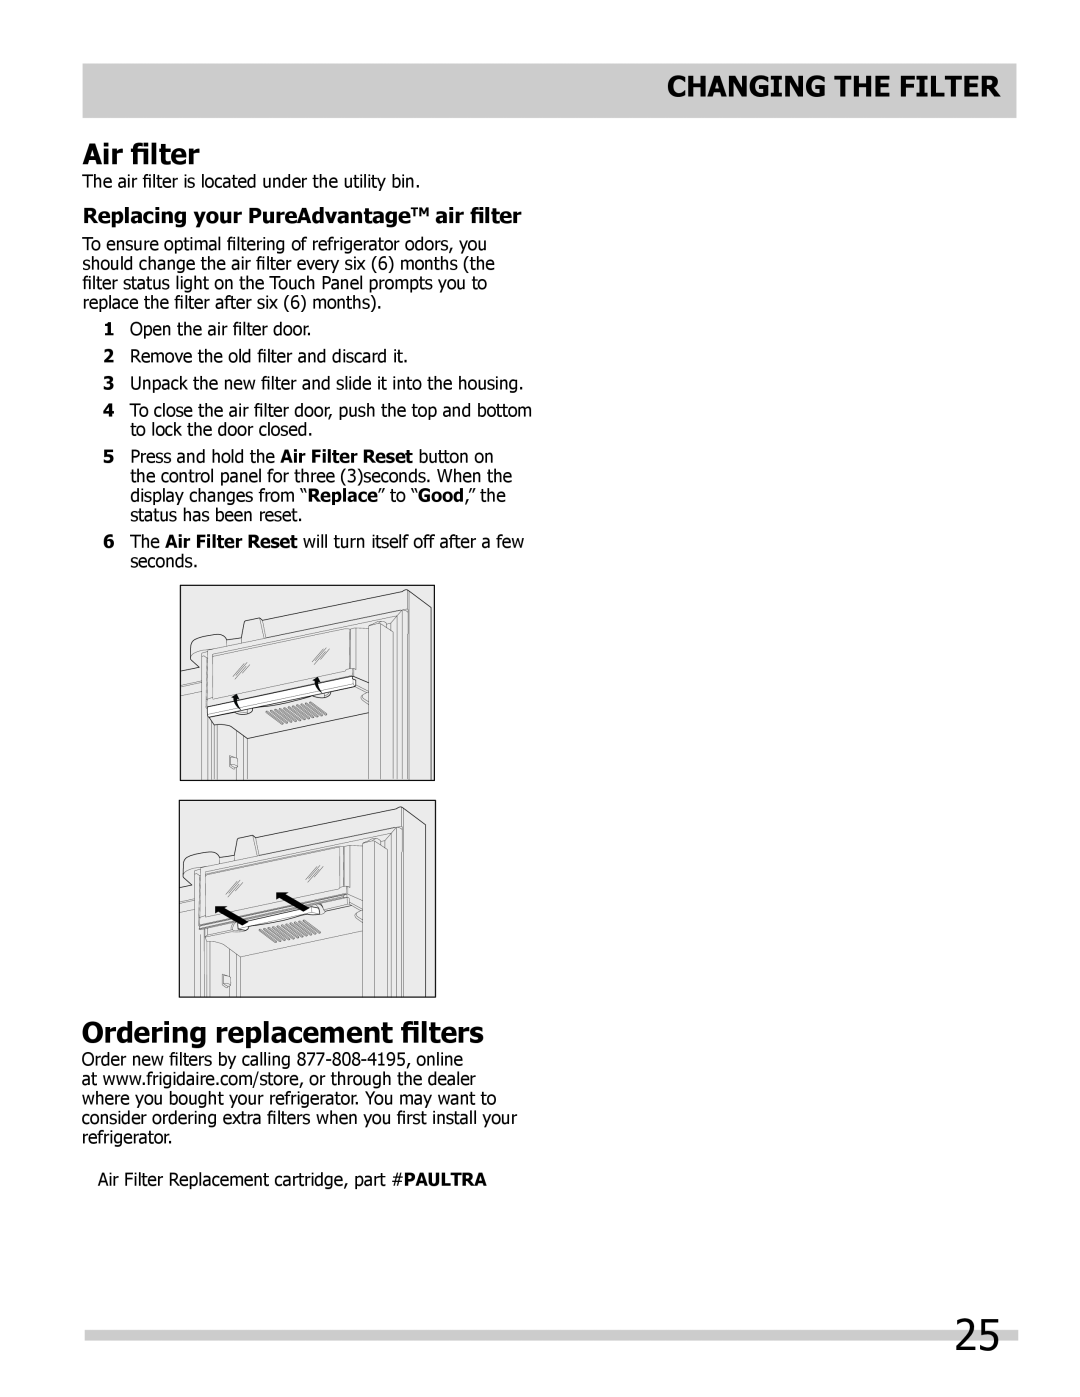 Frigidaire 242046800 important safety instructions CHANGING THE FILTER Air filter, Ordering replacement filters 